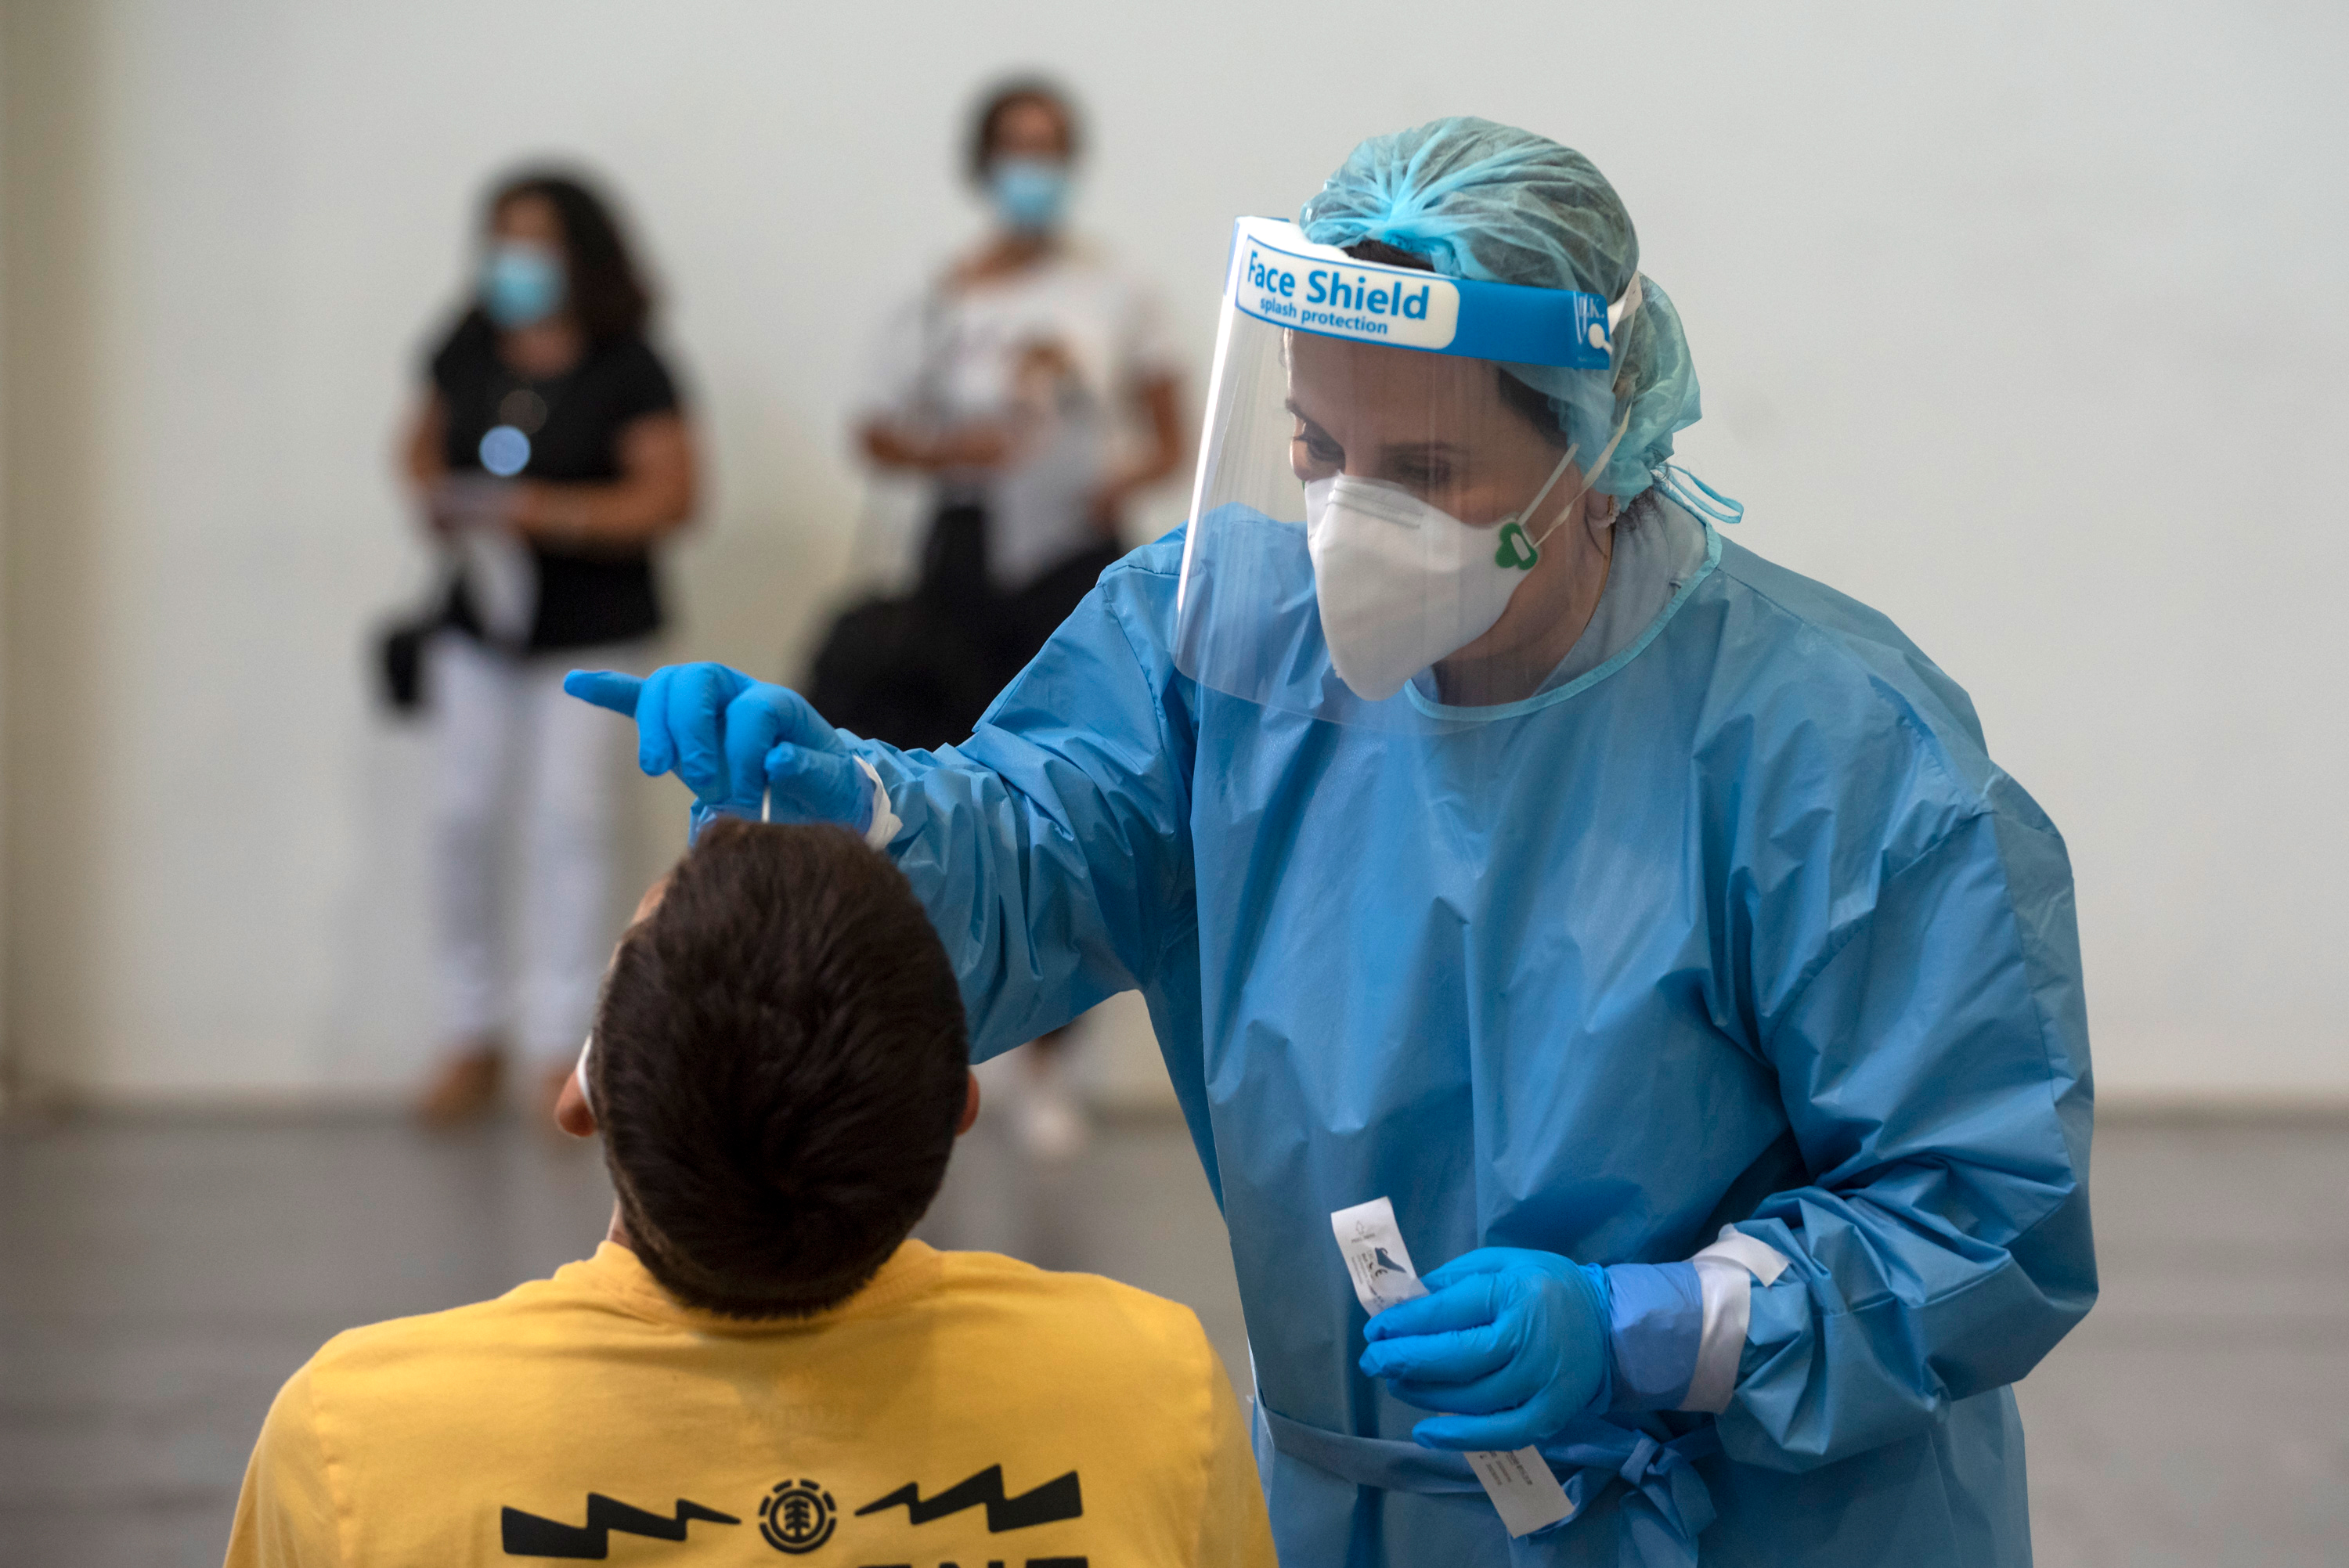 A health worker in Irun, Spain, tests someone for Covid-19 on September 2.